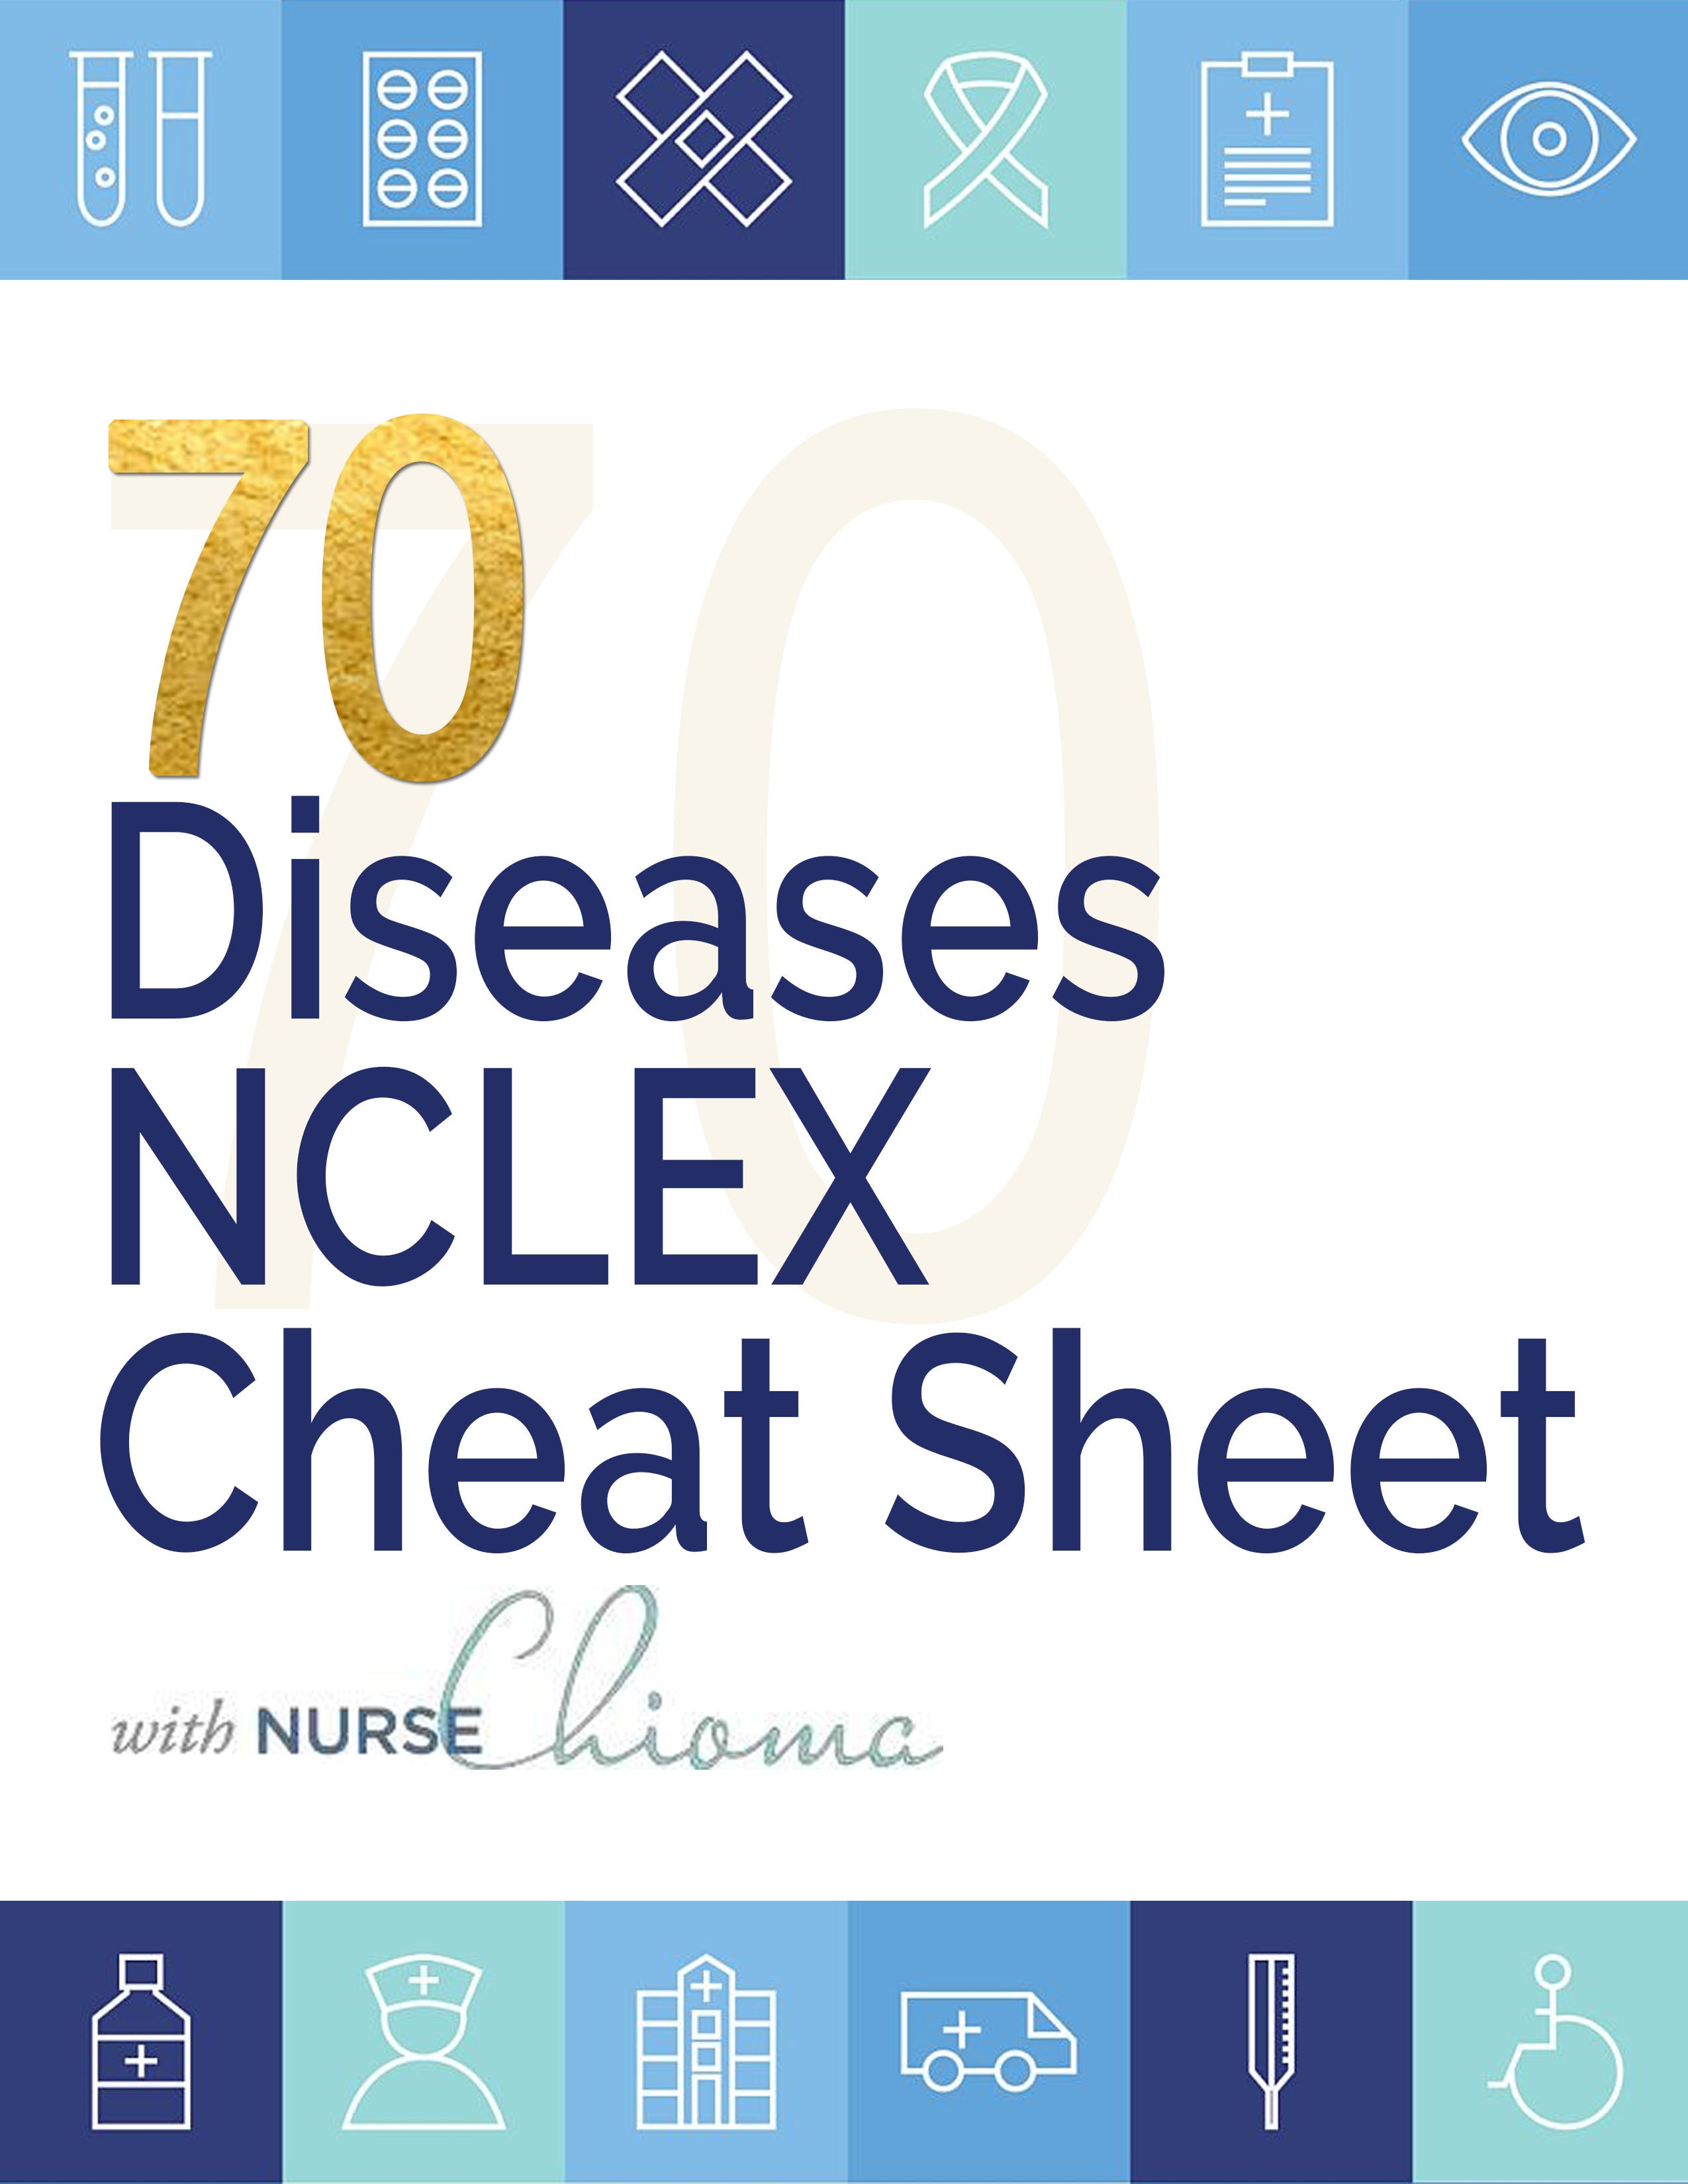 The Best NCLEX Review Book  Review, Cheatsheets, Questions